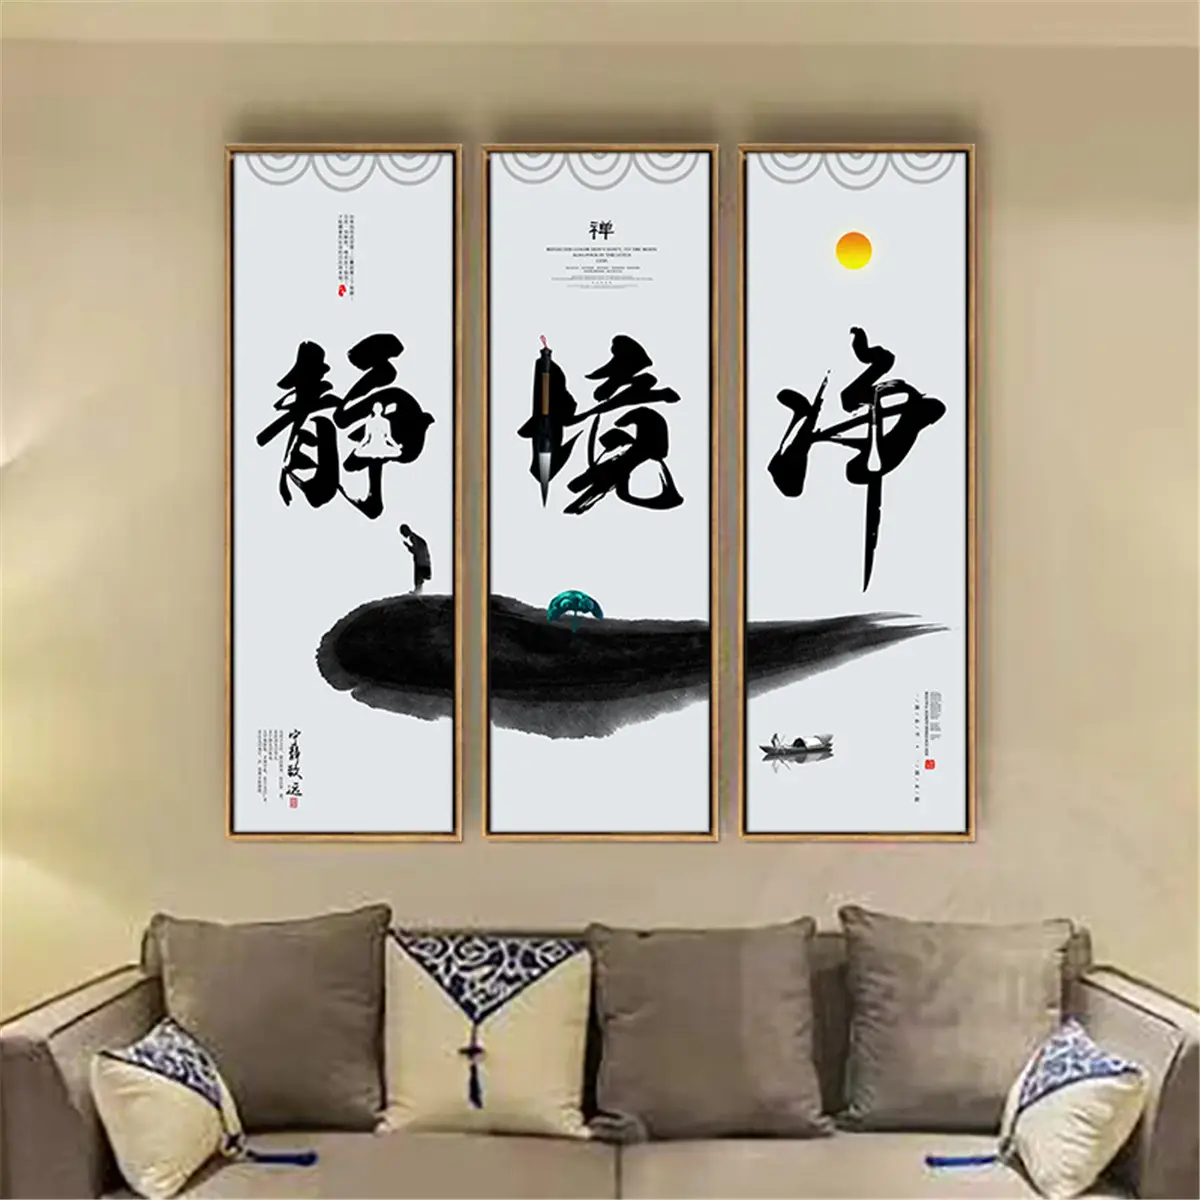 Buddhist mood Calligraphy Canvas Art Poster Picture Wall Home Decor Oil Painting on Canvas Posters Print Art Picture